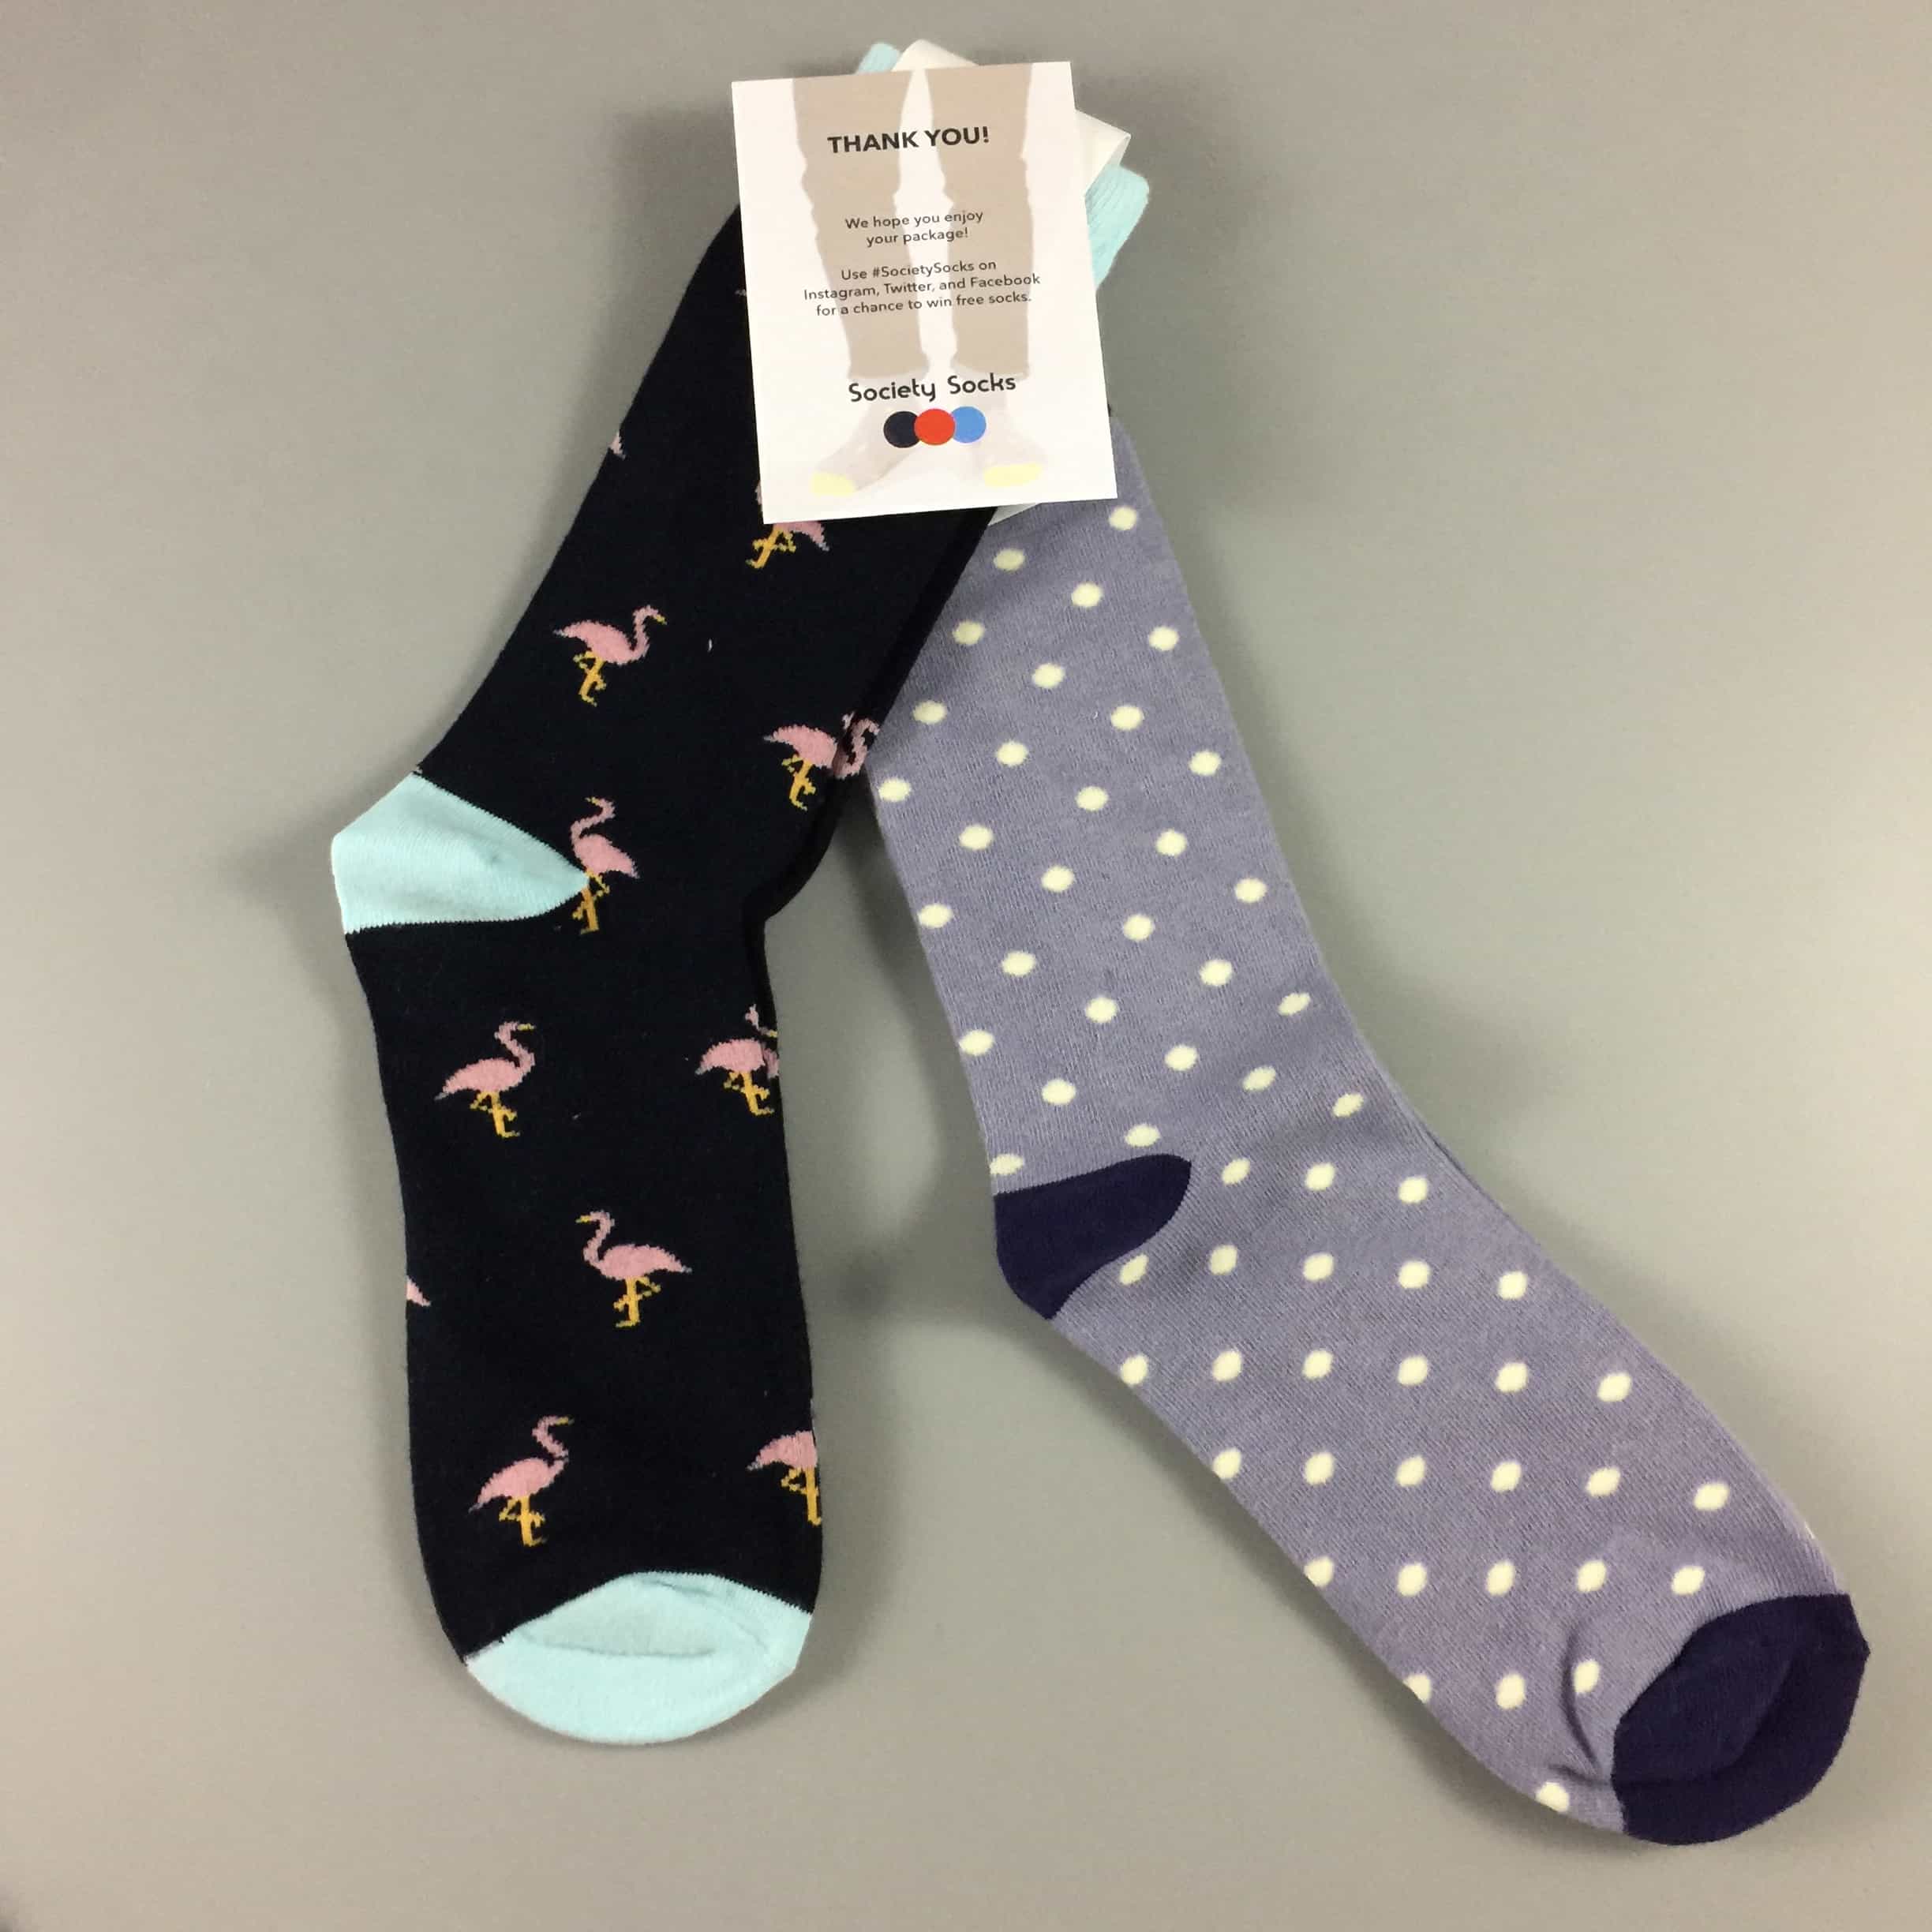 Society Socks August 2017 Subscription Box Review + 50% Off Coupon ...